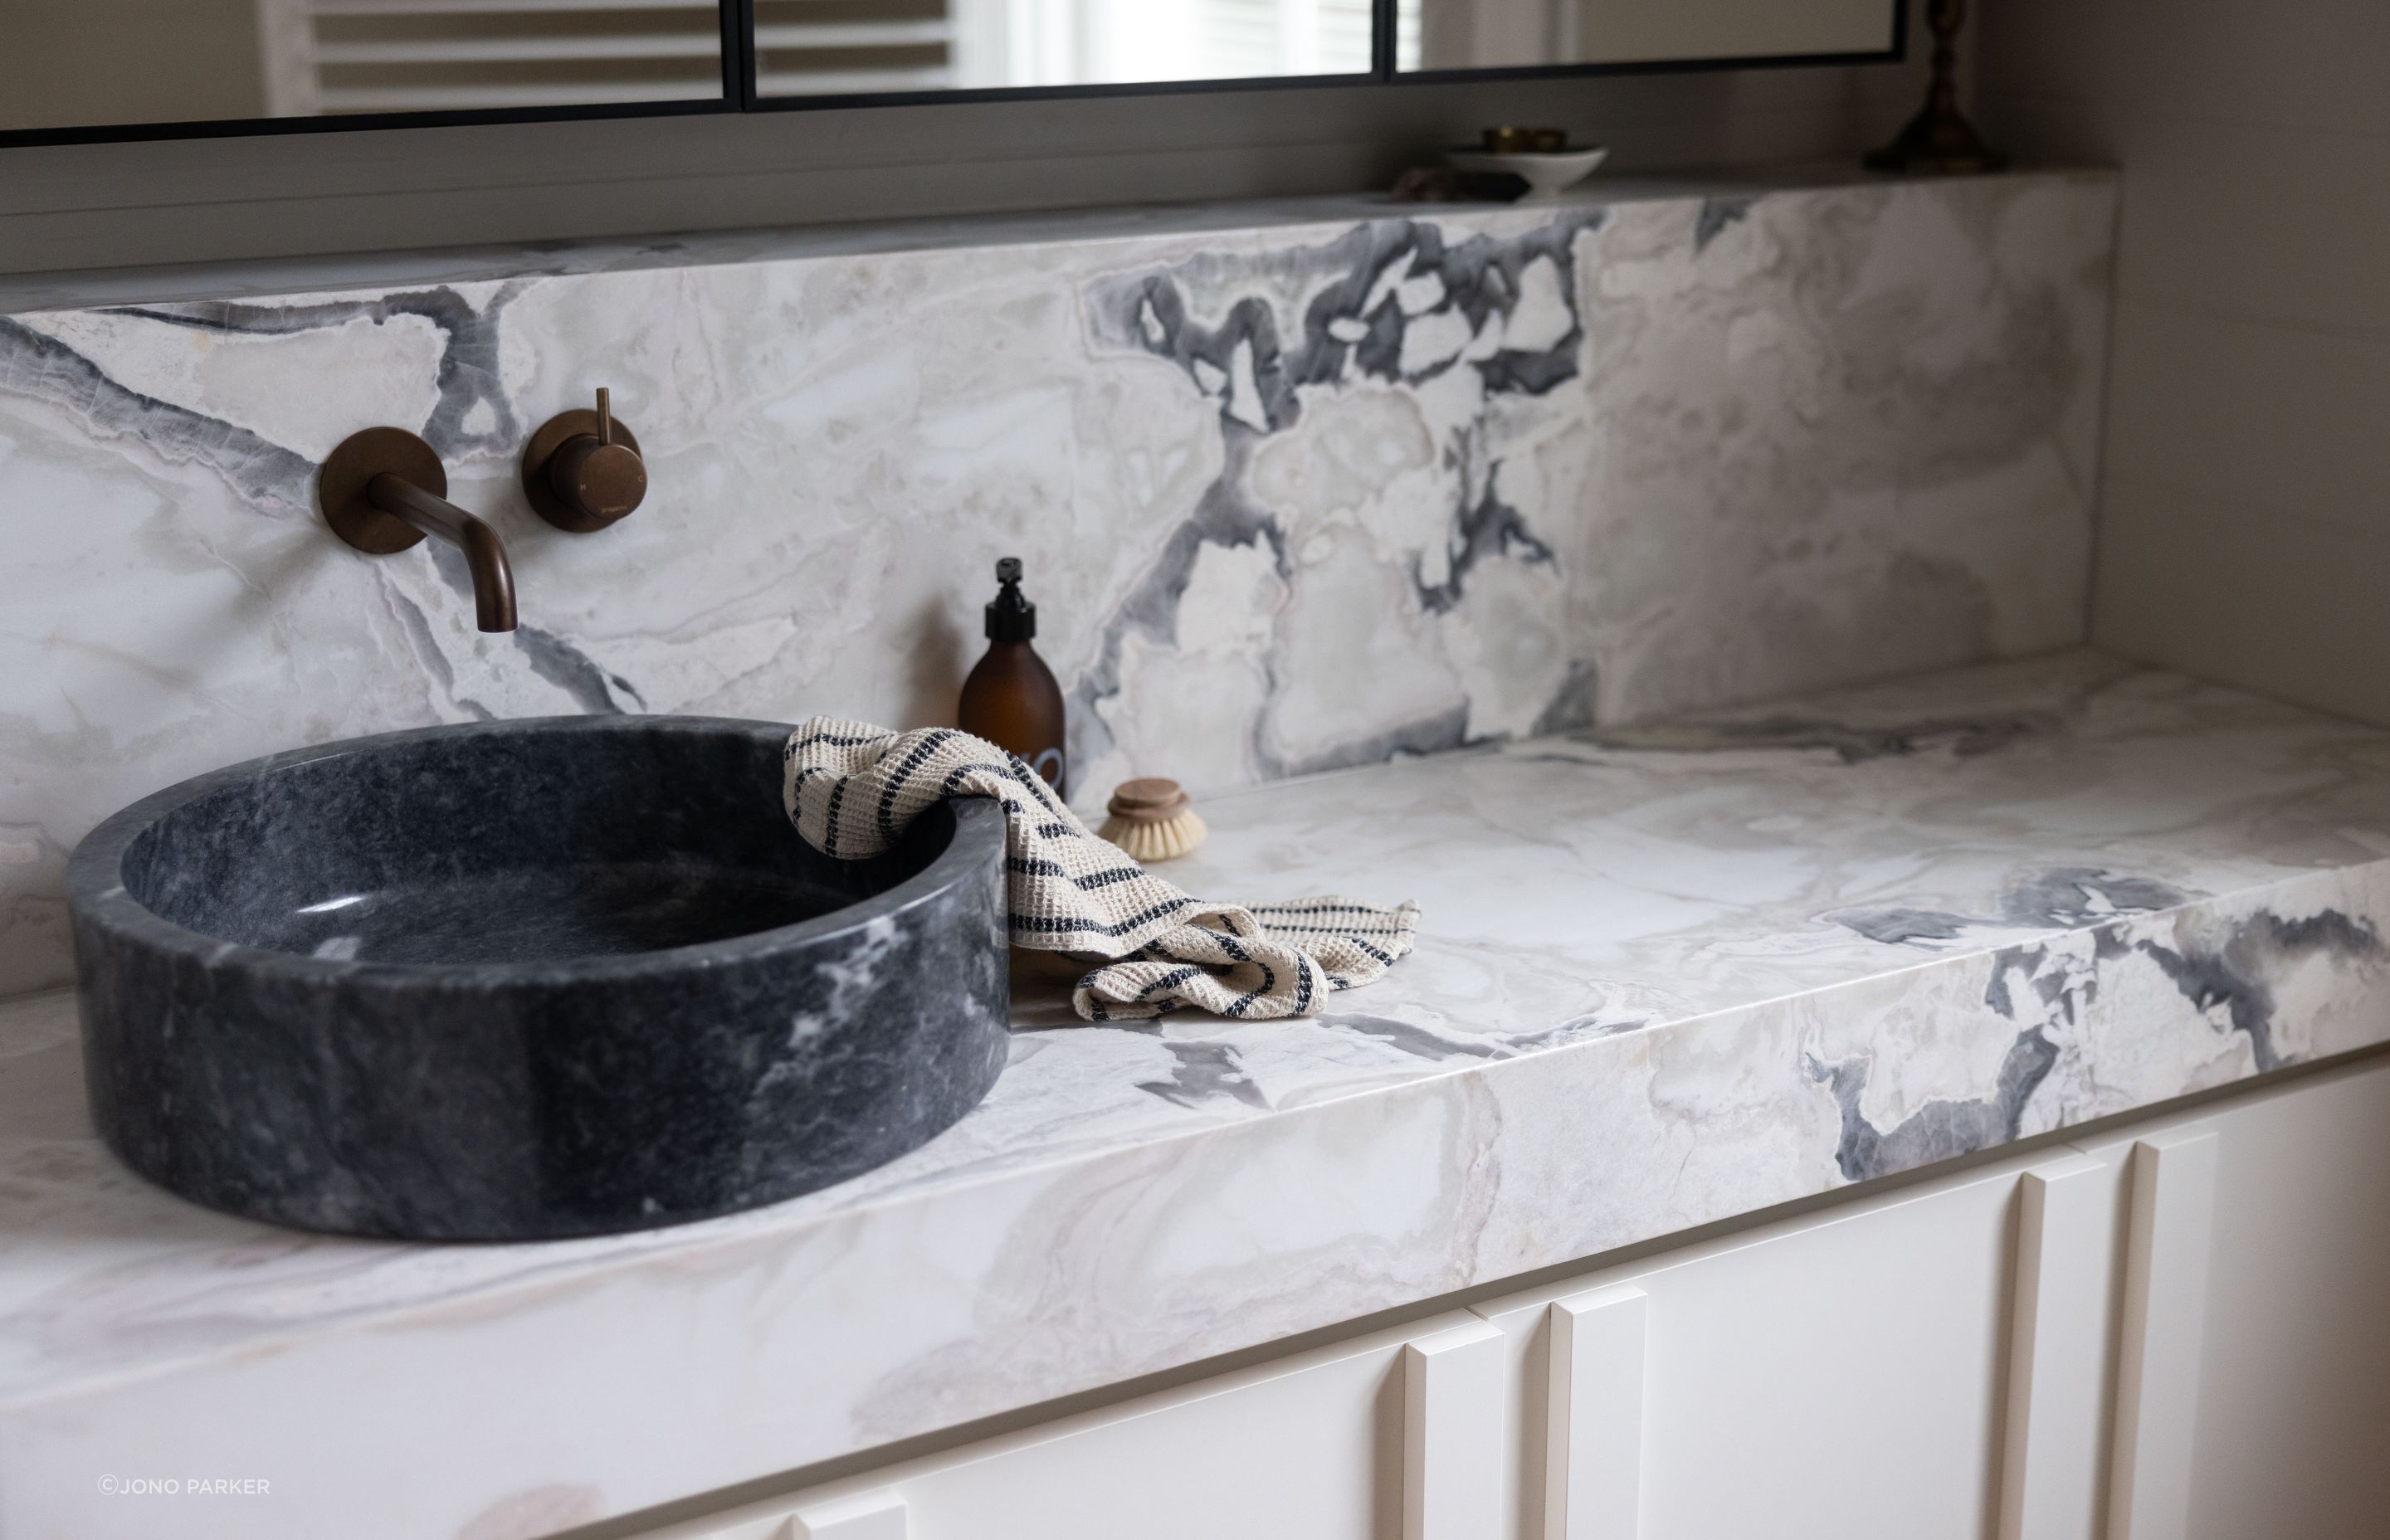 The Artedomus bluestone vessel basin contrasts with the lighter colours in the space, accentuating the marble's veining.